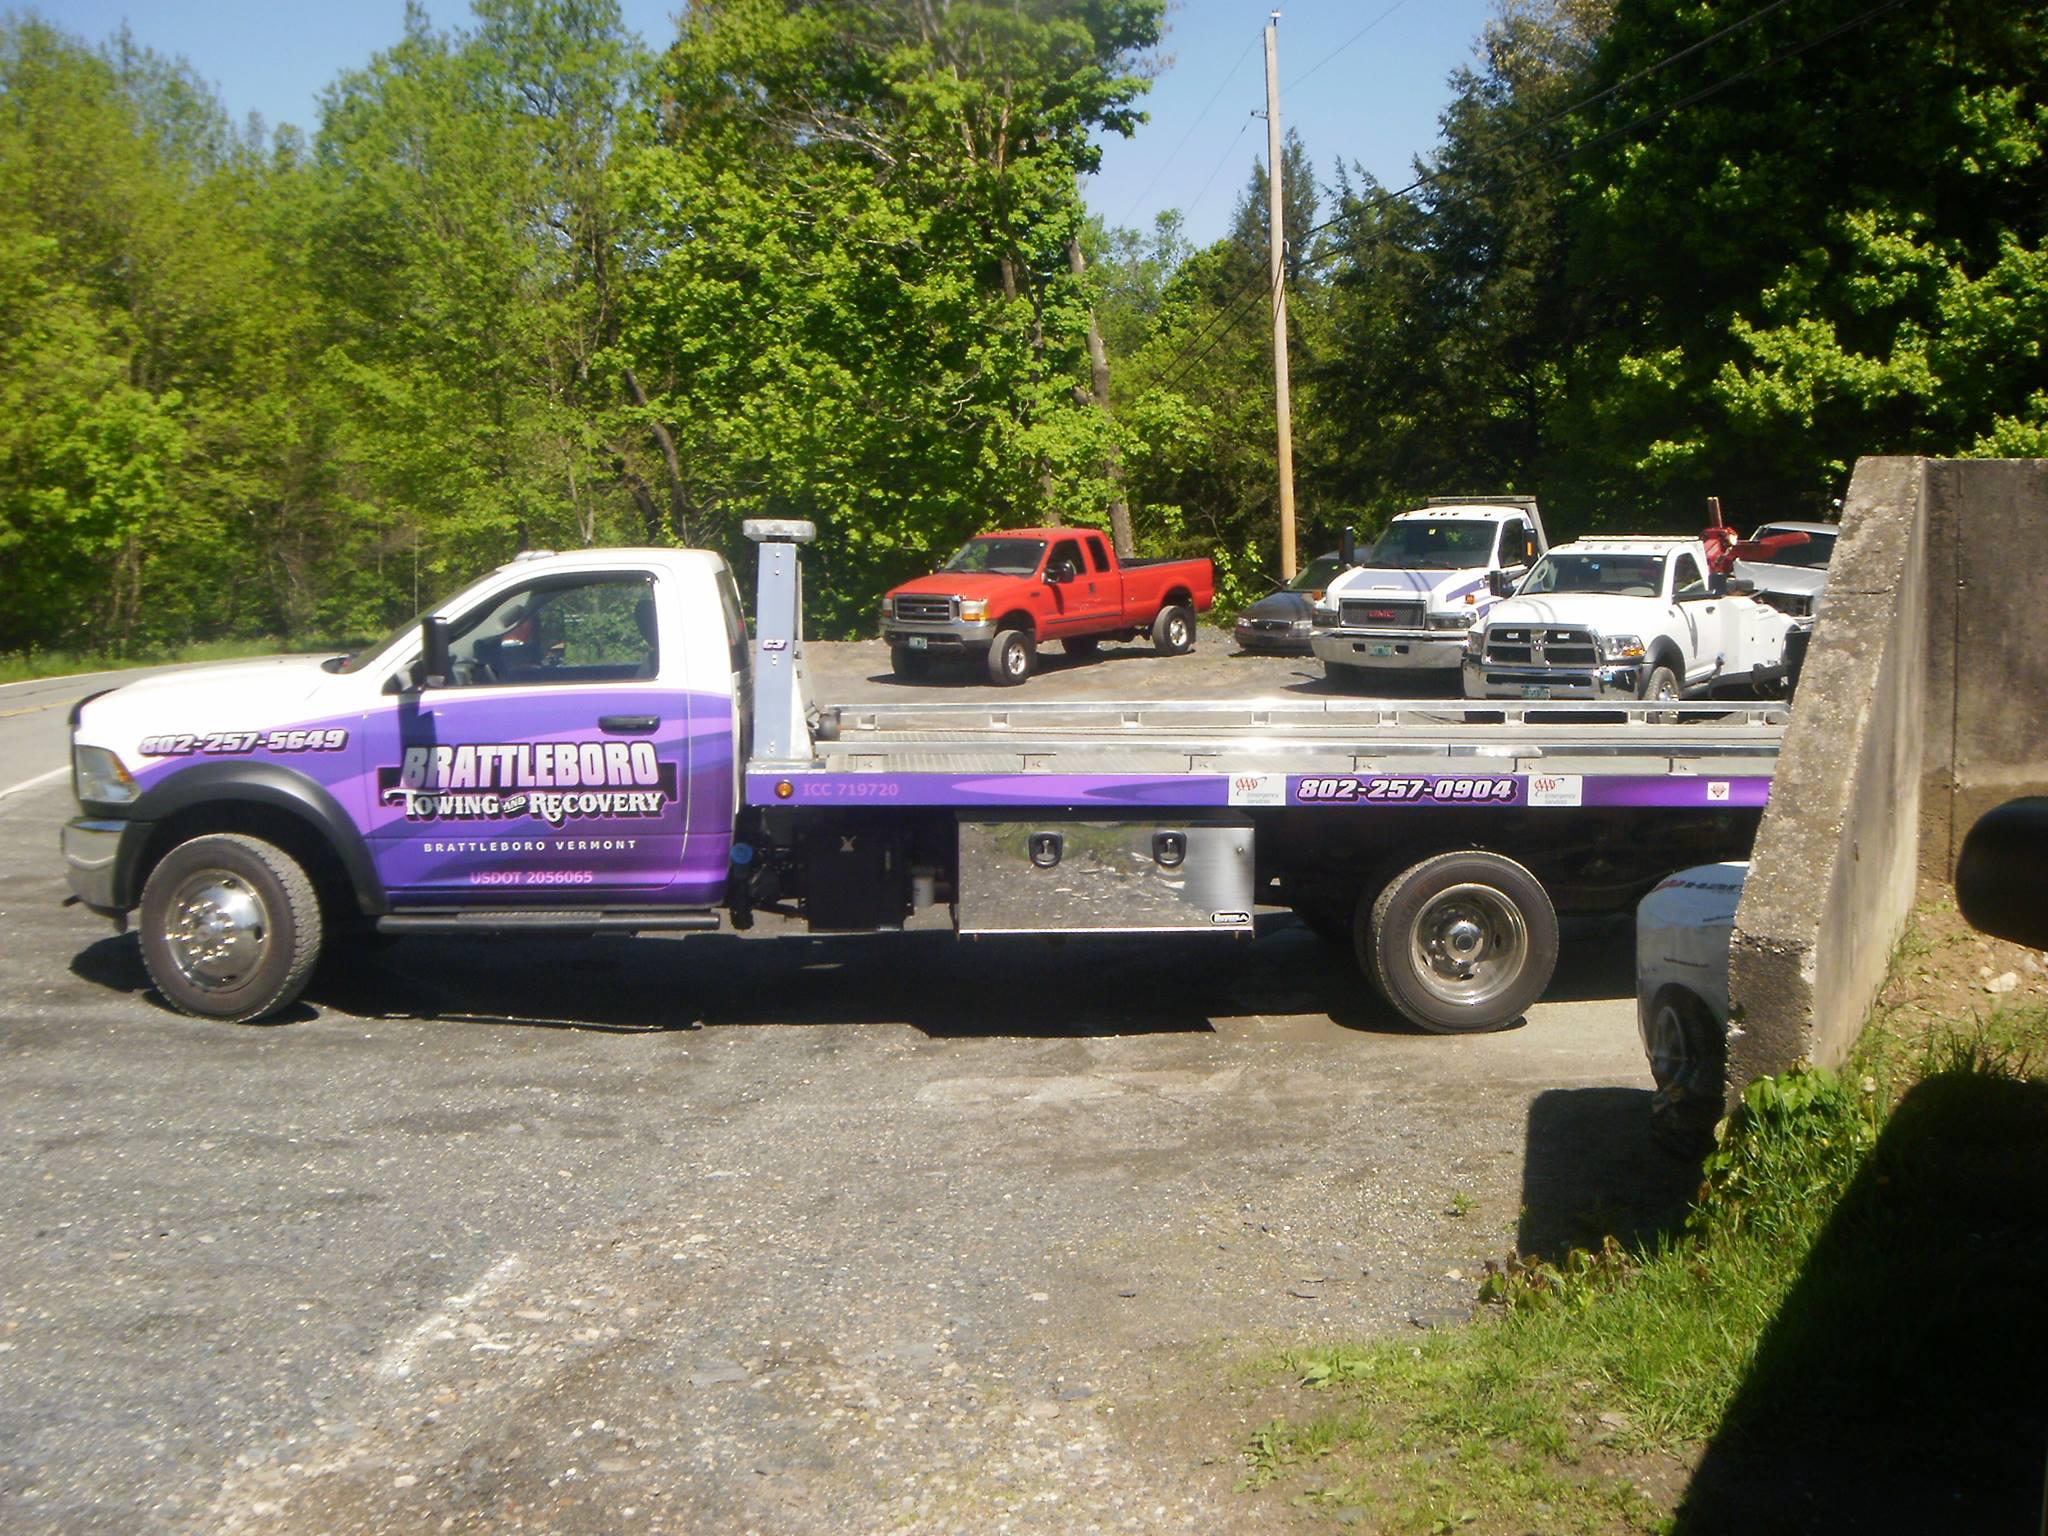 Brattleboro Towing and Recovery Photo